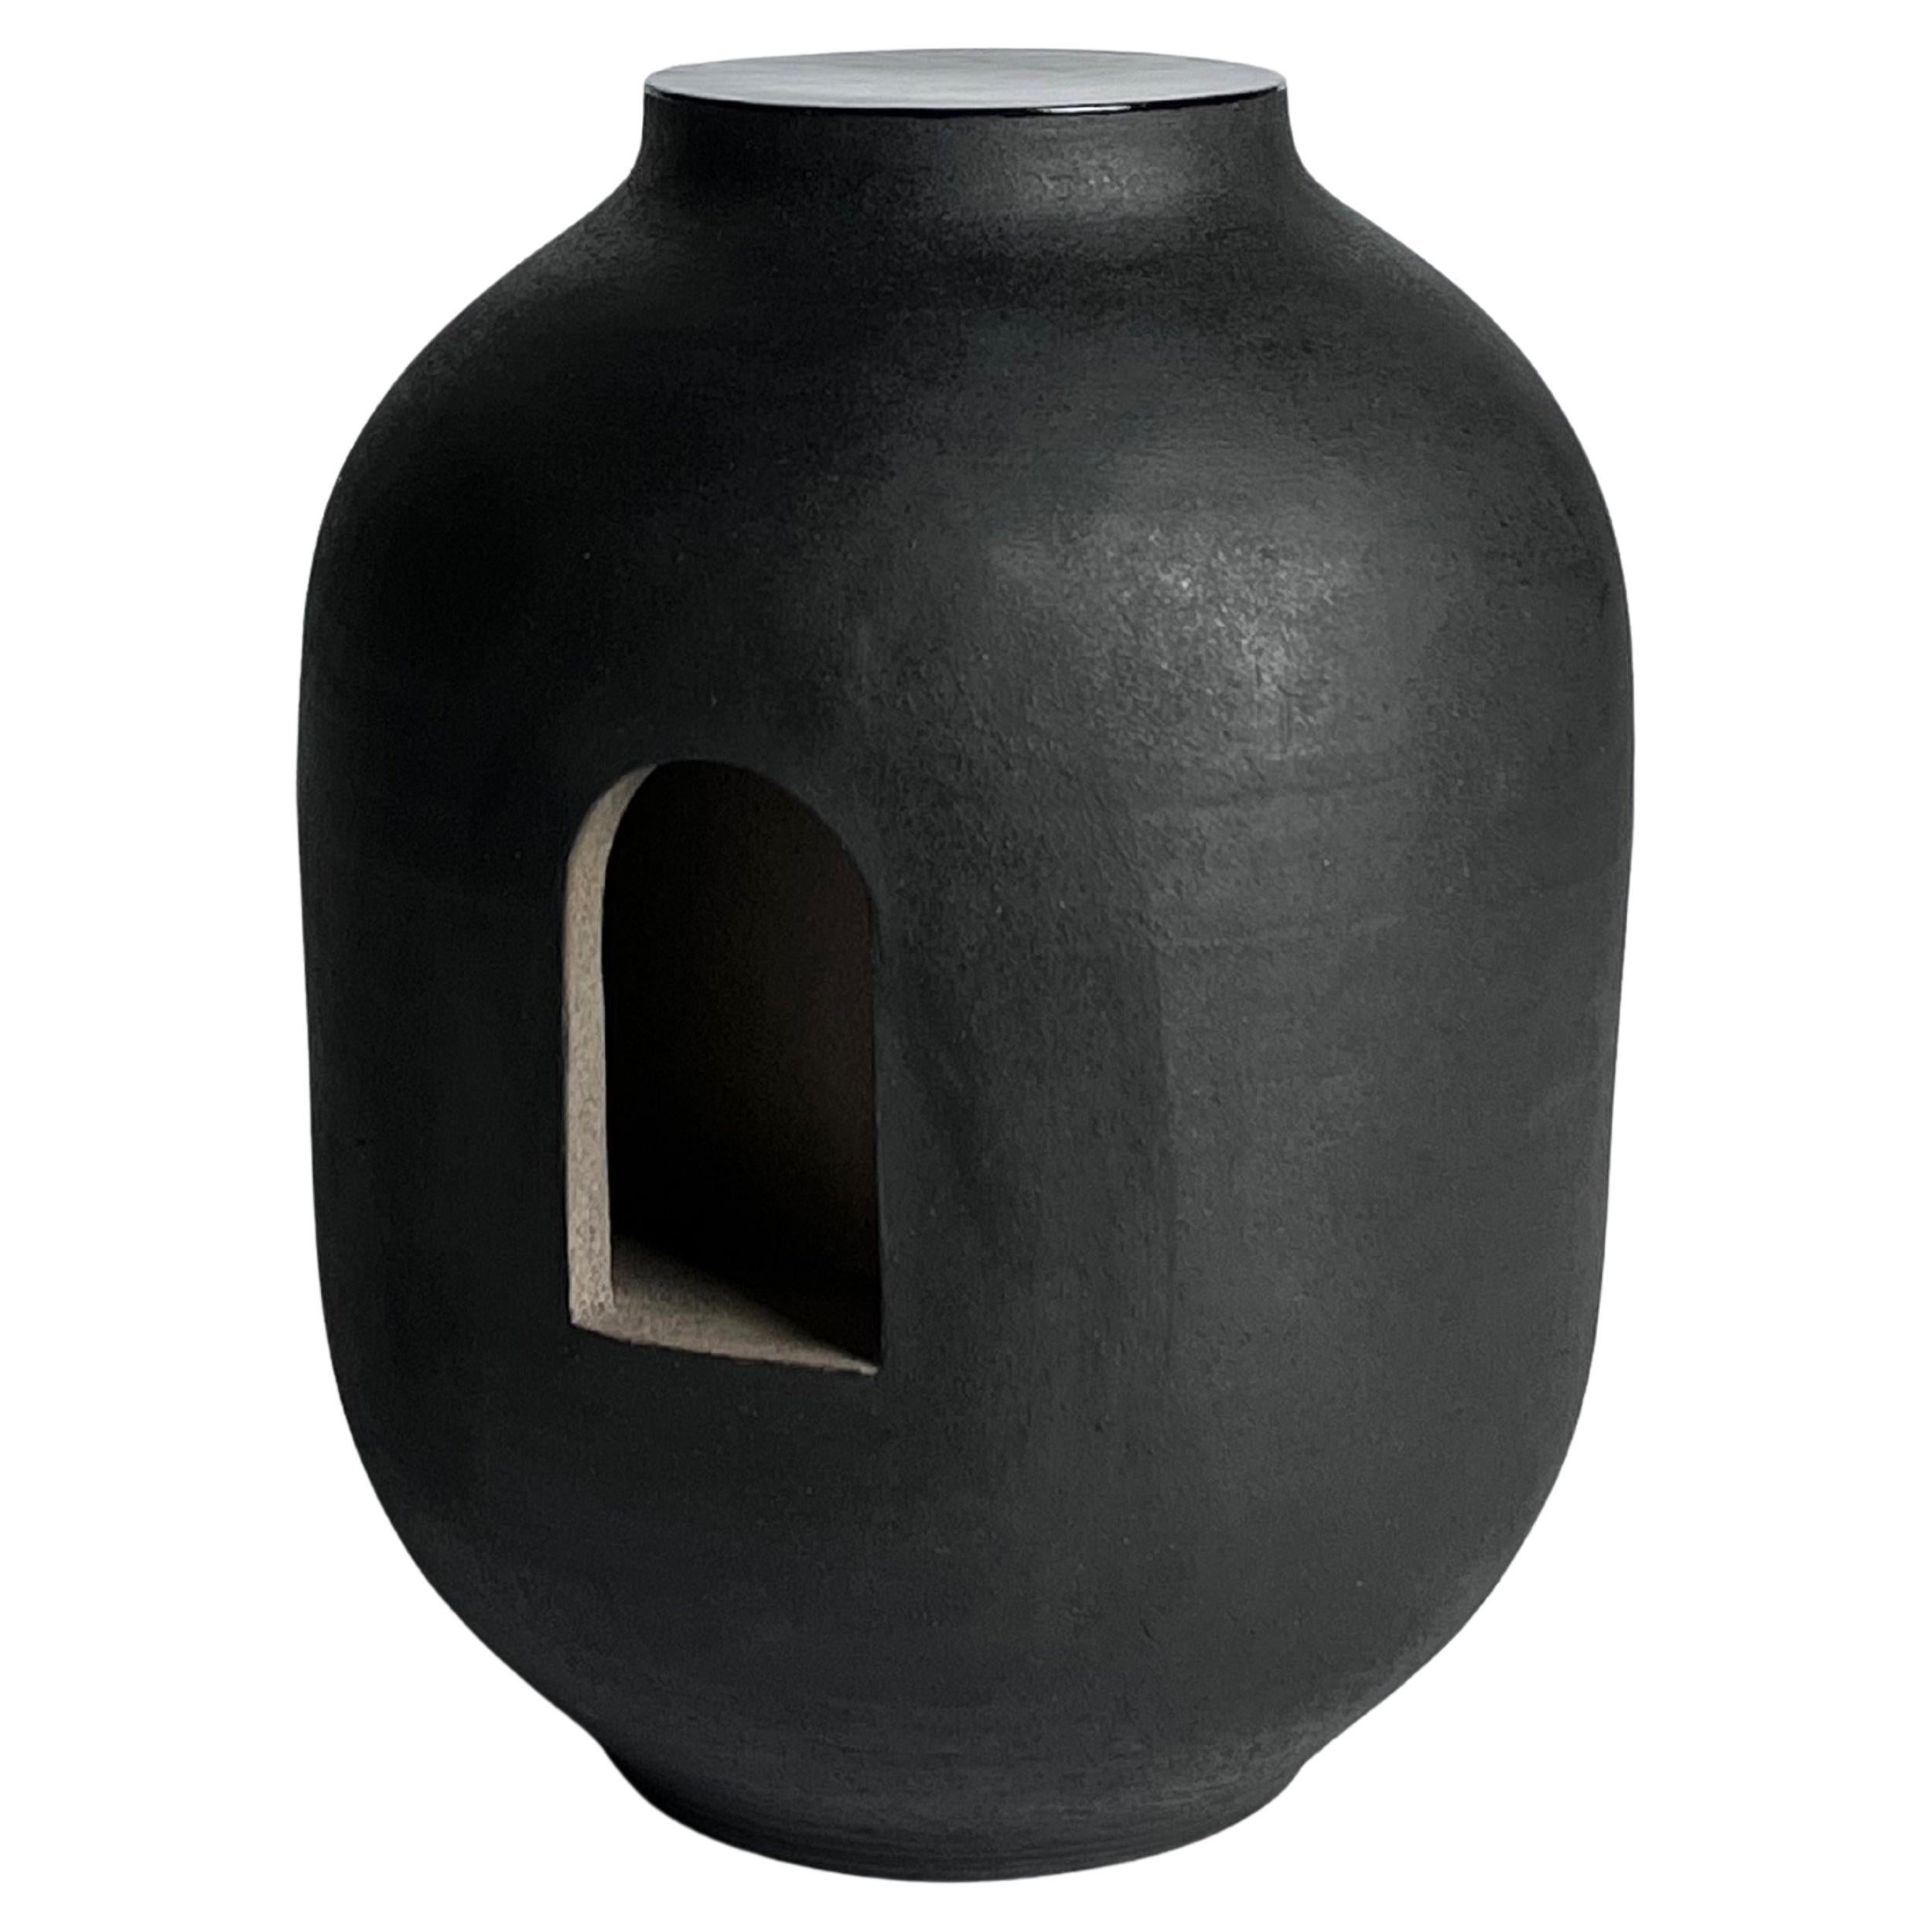 Black and cement gray stoneware vase For Sale at 1stDibs